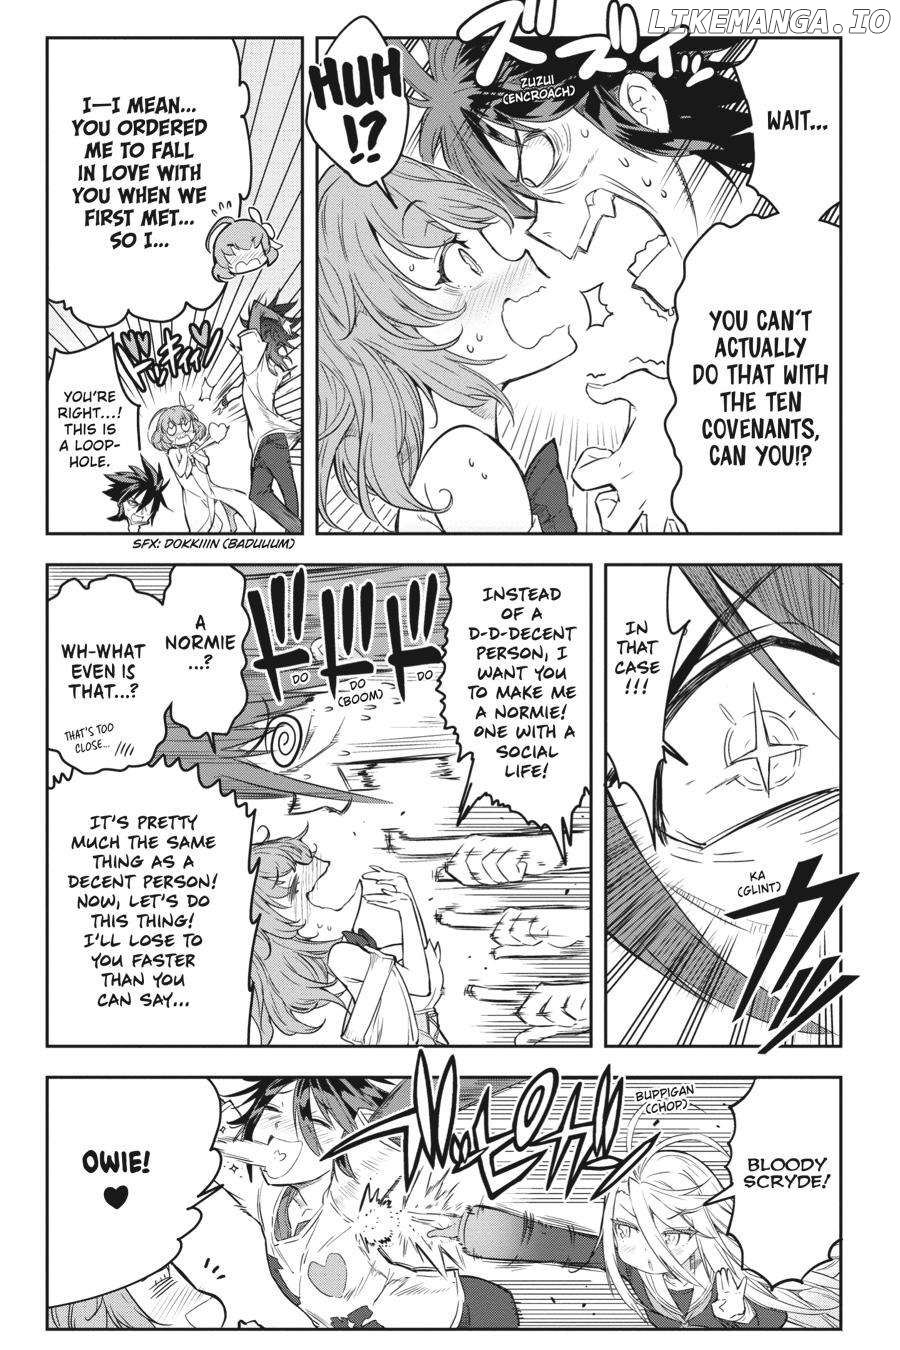 No Game No Life Chapter 2 - Eastern Union Arc Chapter 1 - page 23